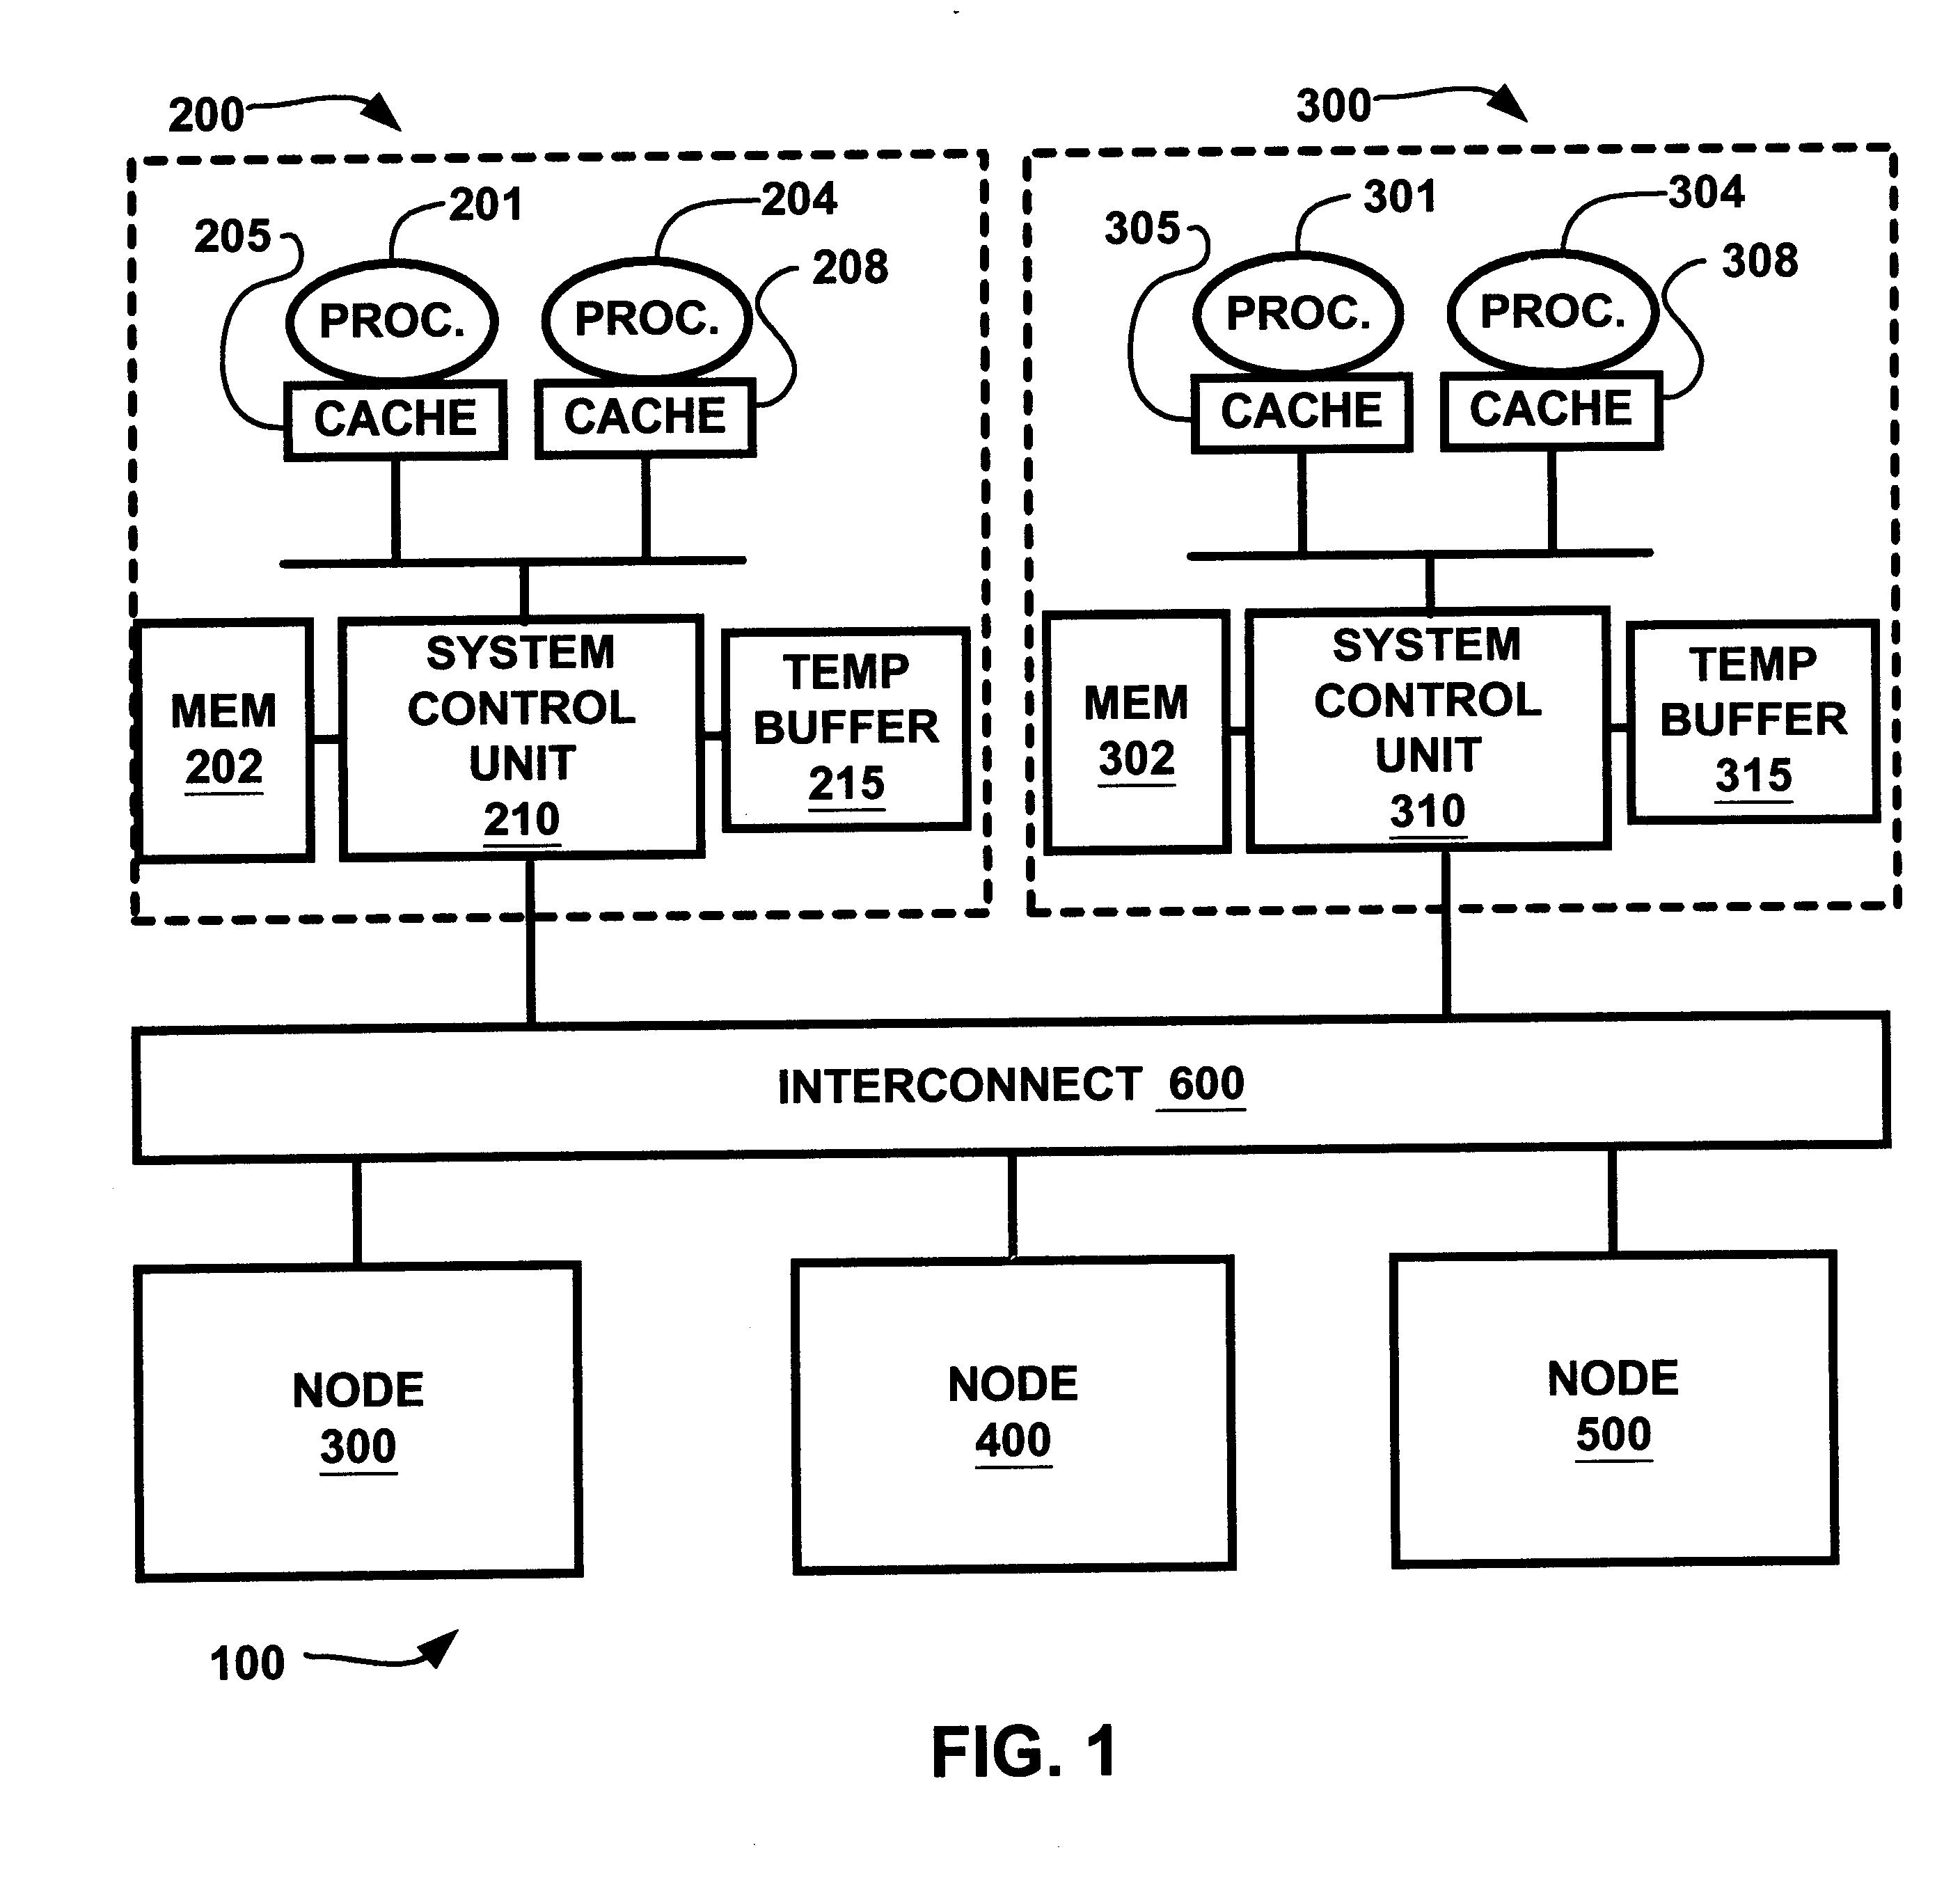 Cache-flushing engine for distributed shared memory multi-processor computer systems